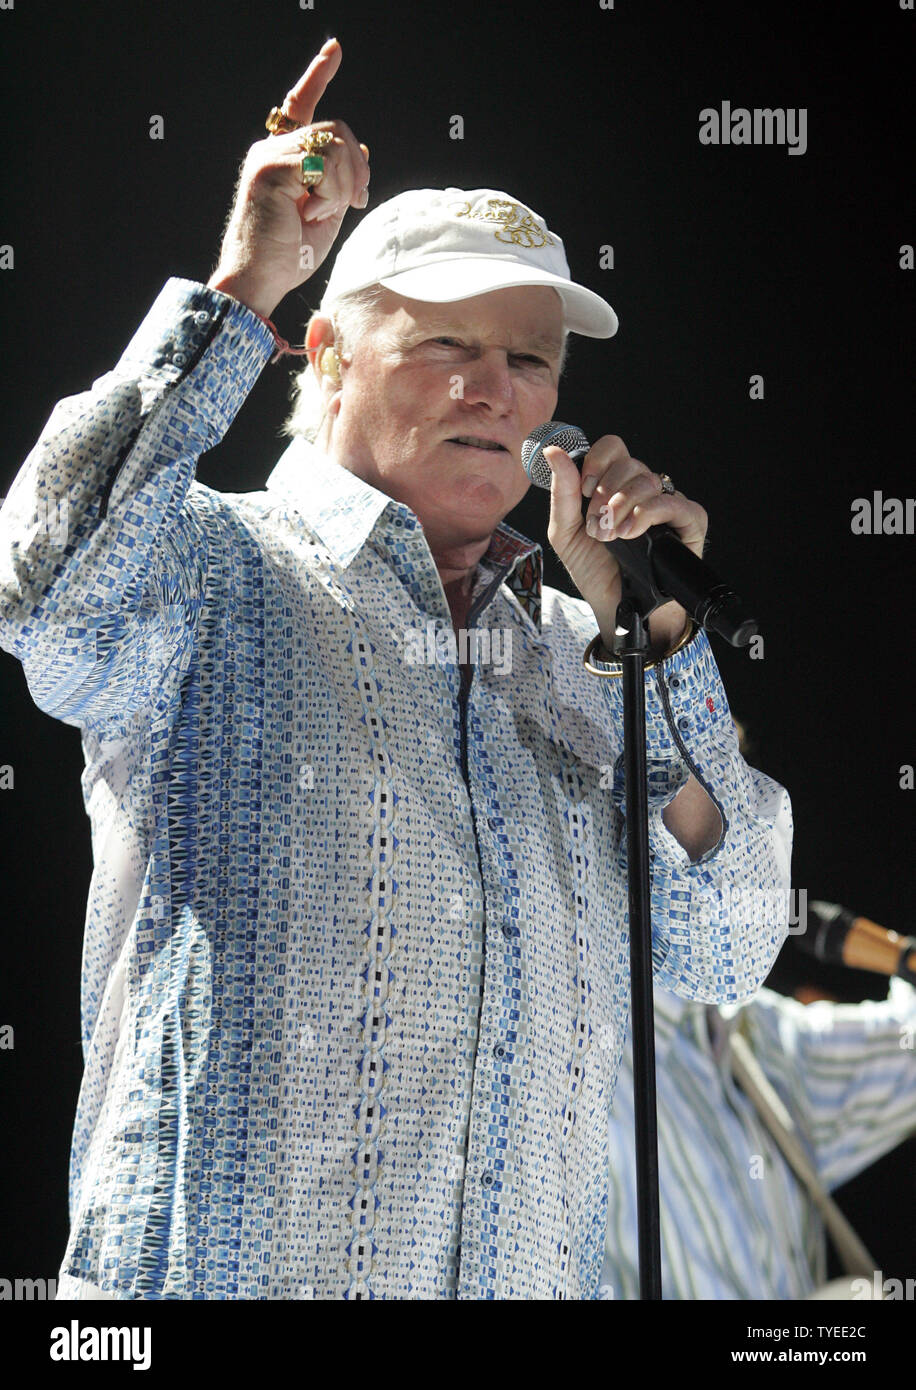 Mike Love with the Beach Boys performs in concert at the Seminole Hard Rock Hotel and Casino in Hollywood, Florida on May 4, 2012. UPI/Michael Bush Stock Photo